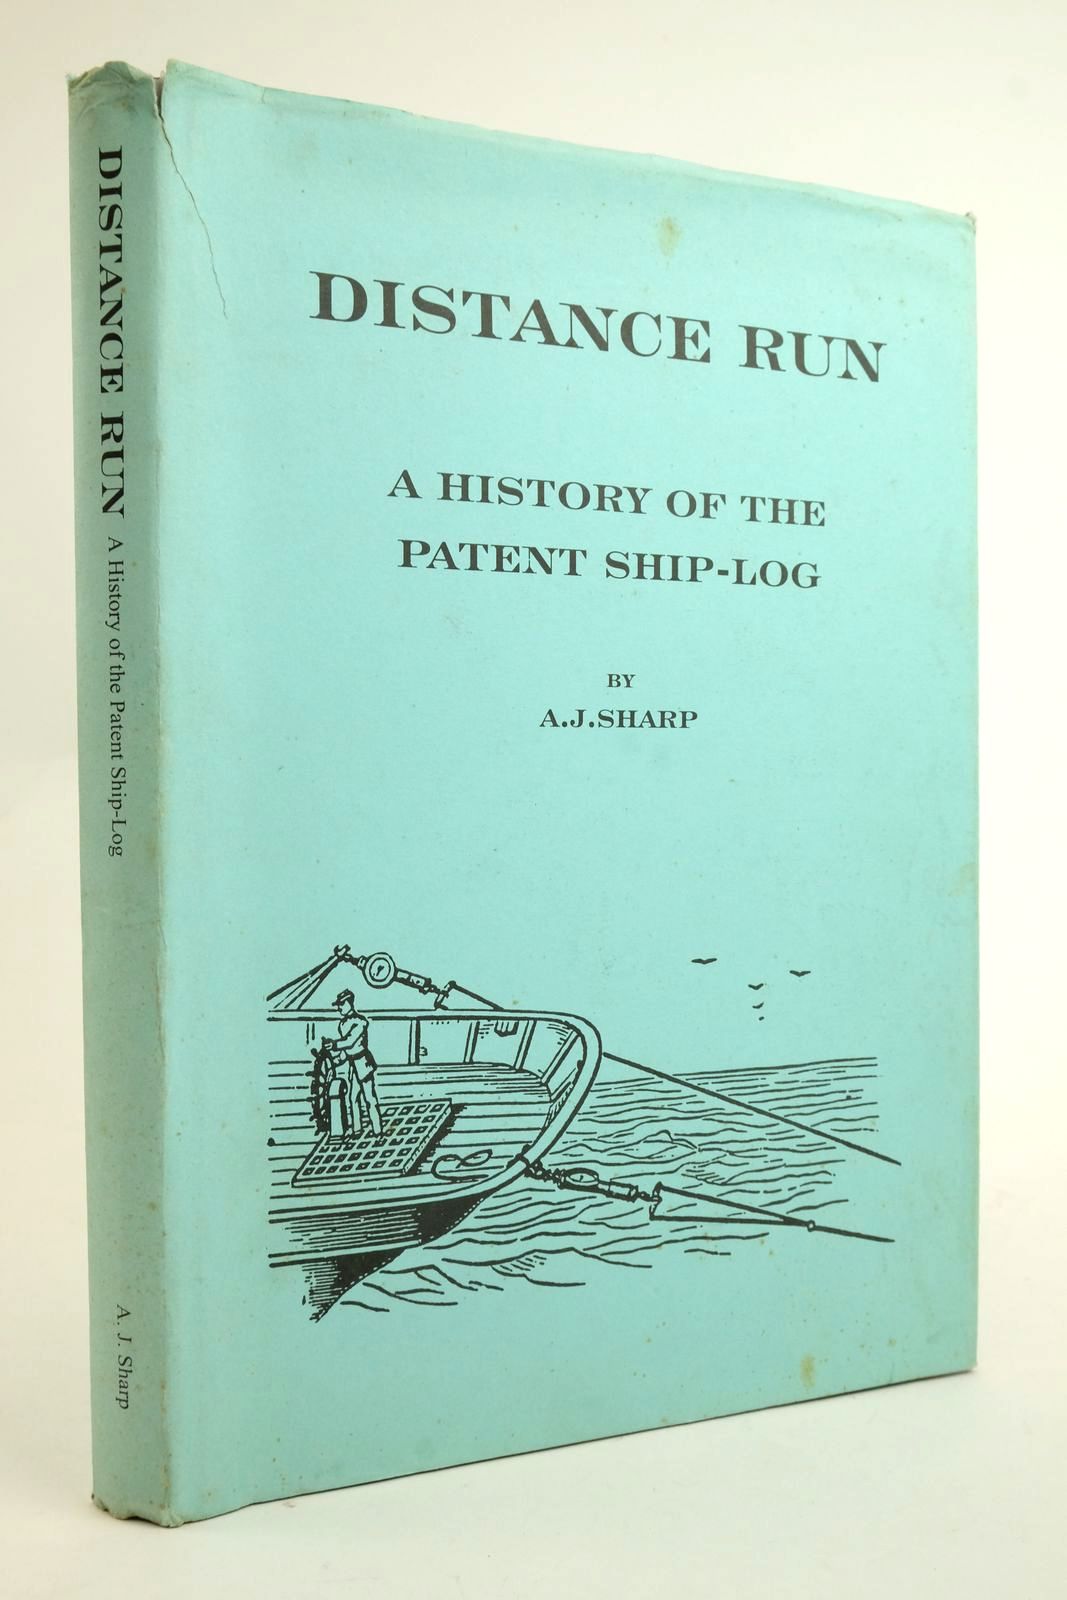 Photo of DISTANCE RUN: A HISTORY OF THE PATENT SHIP-LOG written by Sharp, A.J. published by Brassbounders (publishing) (STOCK CODE: 2136025)  for sale by Stella & Rose's Books